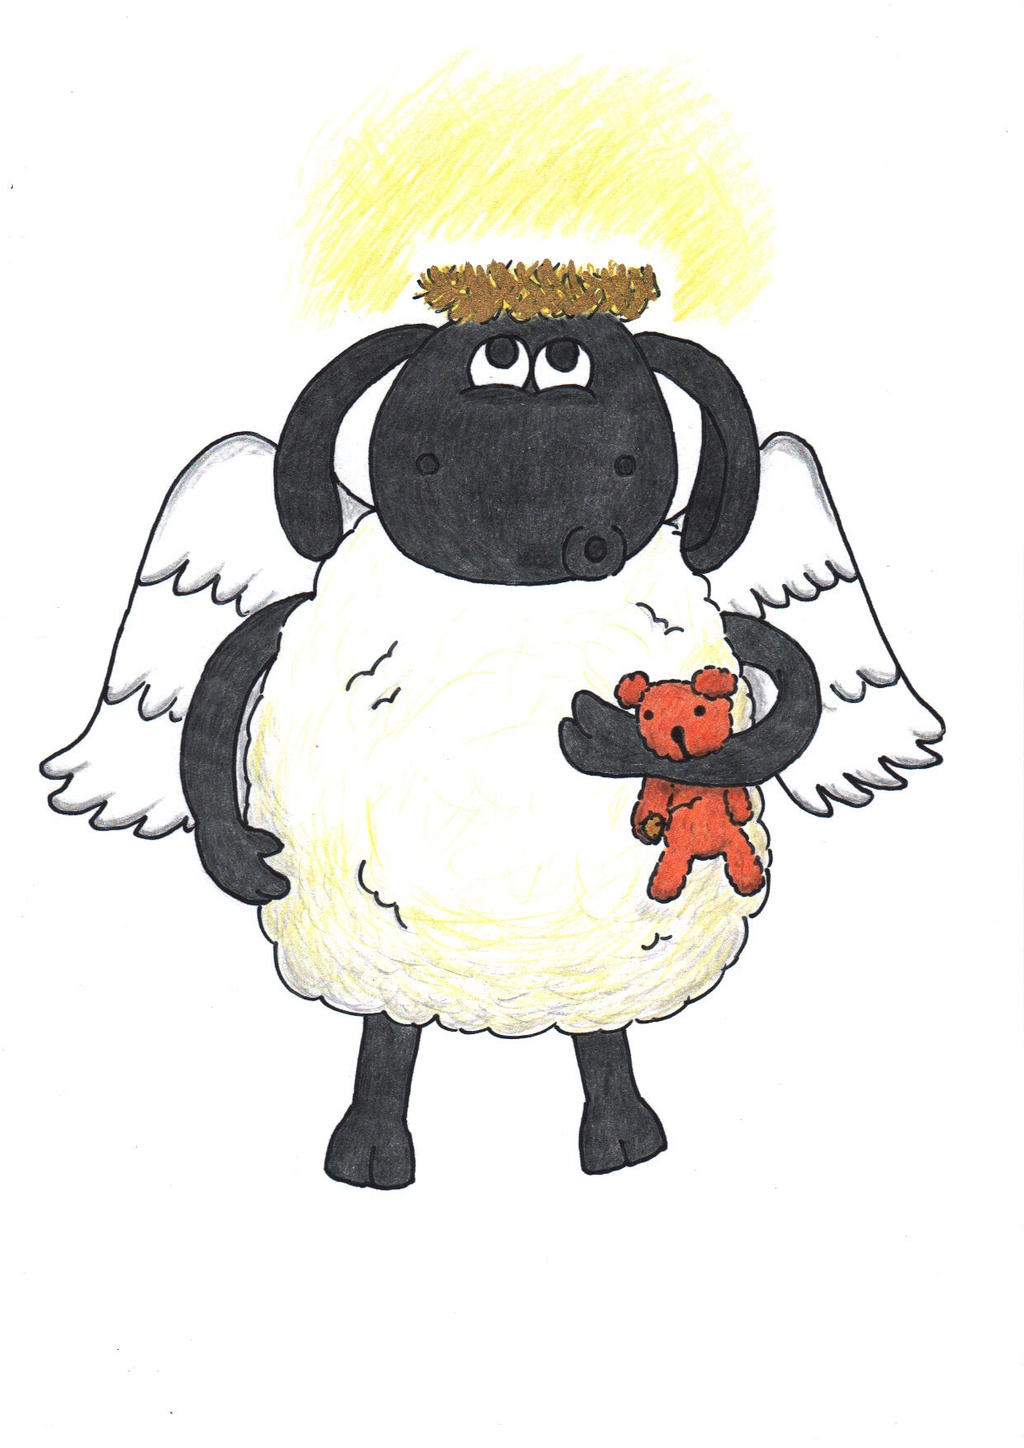 Timmy the sheep as an angel by artjuggler on DeviantArt